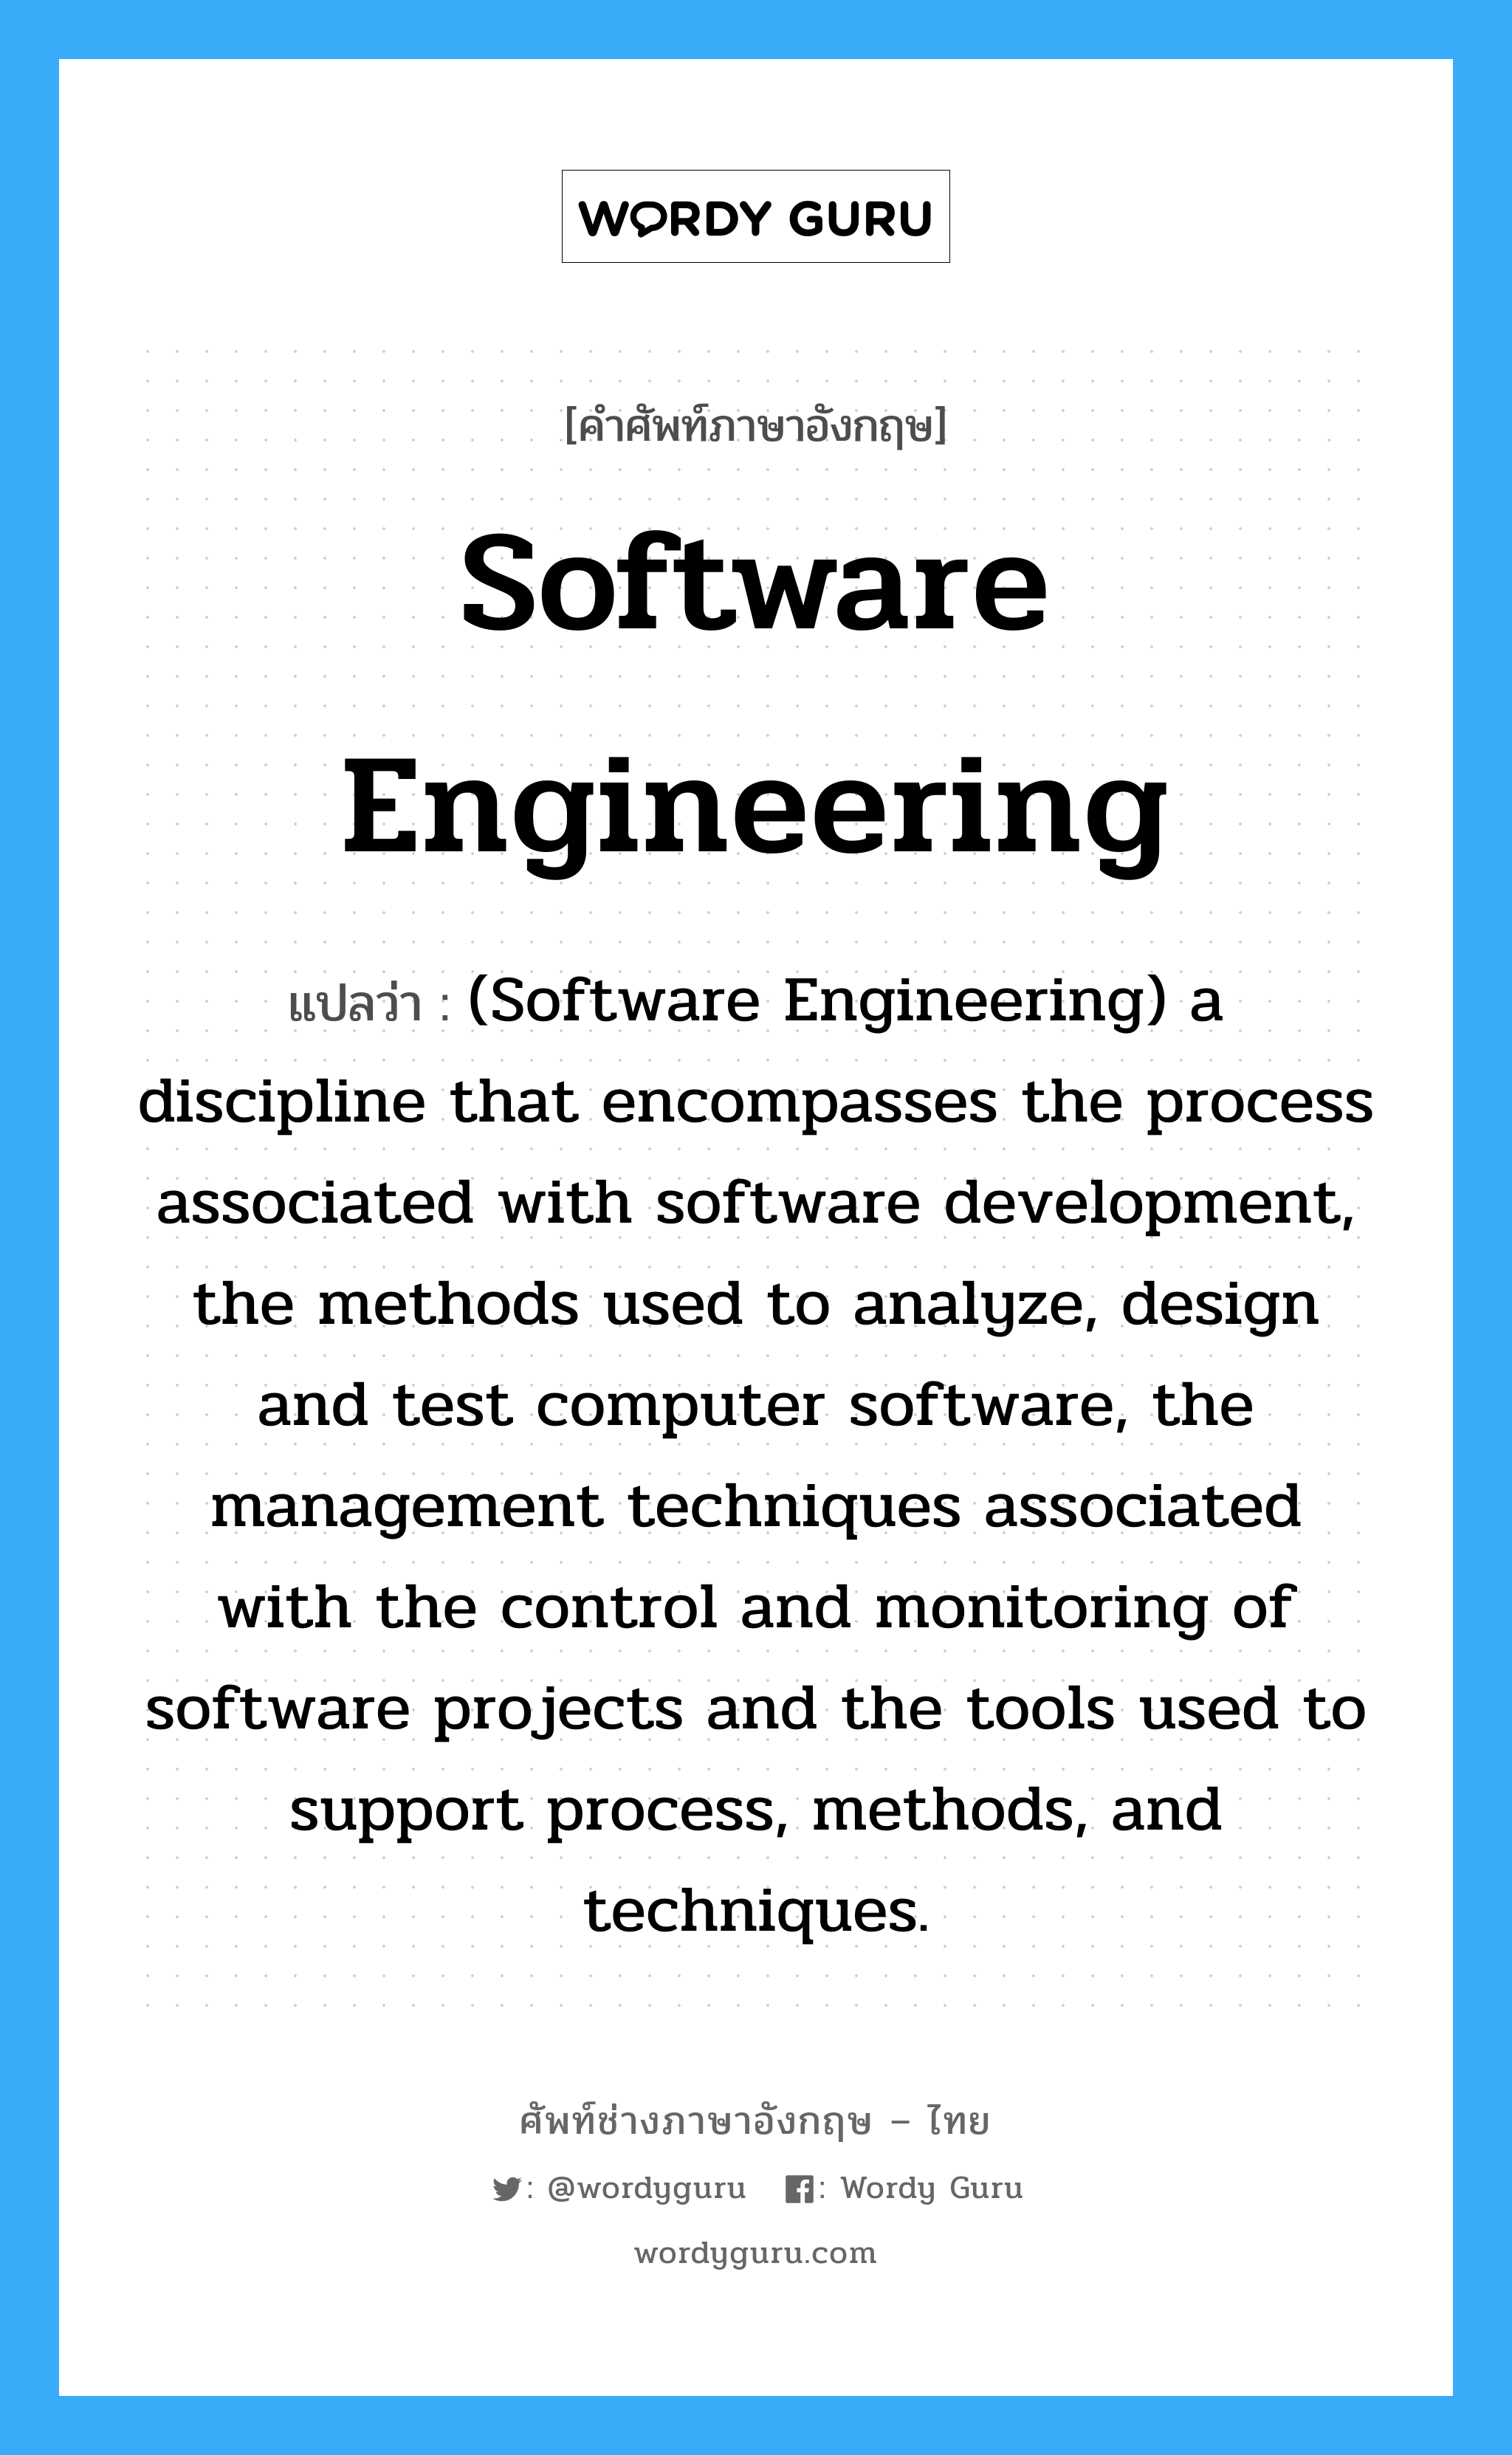 Software engineering แปลว่า?, คำศัพท์ช่างภาษาอังกฤษ - ไทย Software engineering คำศัพท์ภาษาอังกฤษ Software engineering แปลว่า (Software Engineering) a discipline that encompasses the process associated with software development, the methods used to analyze, design and test computer software, the management techniques associated with the control and monitoring of software projects and the tools used to support process, methods, and techniques.